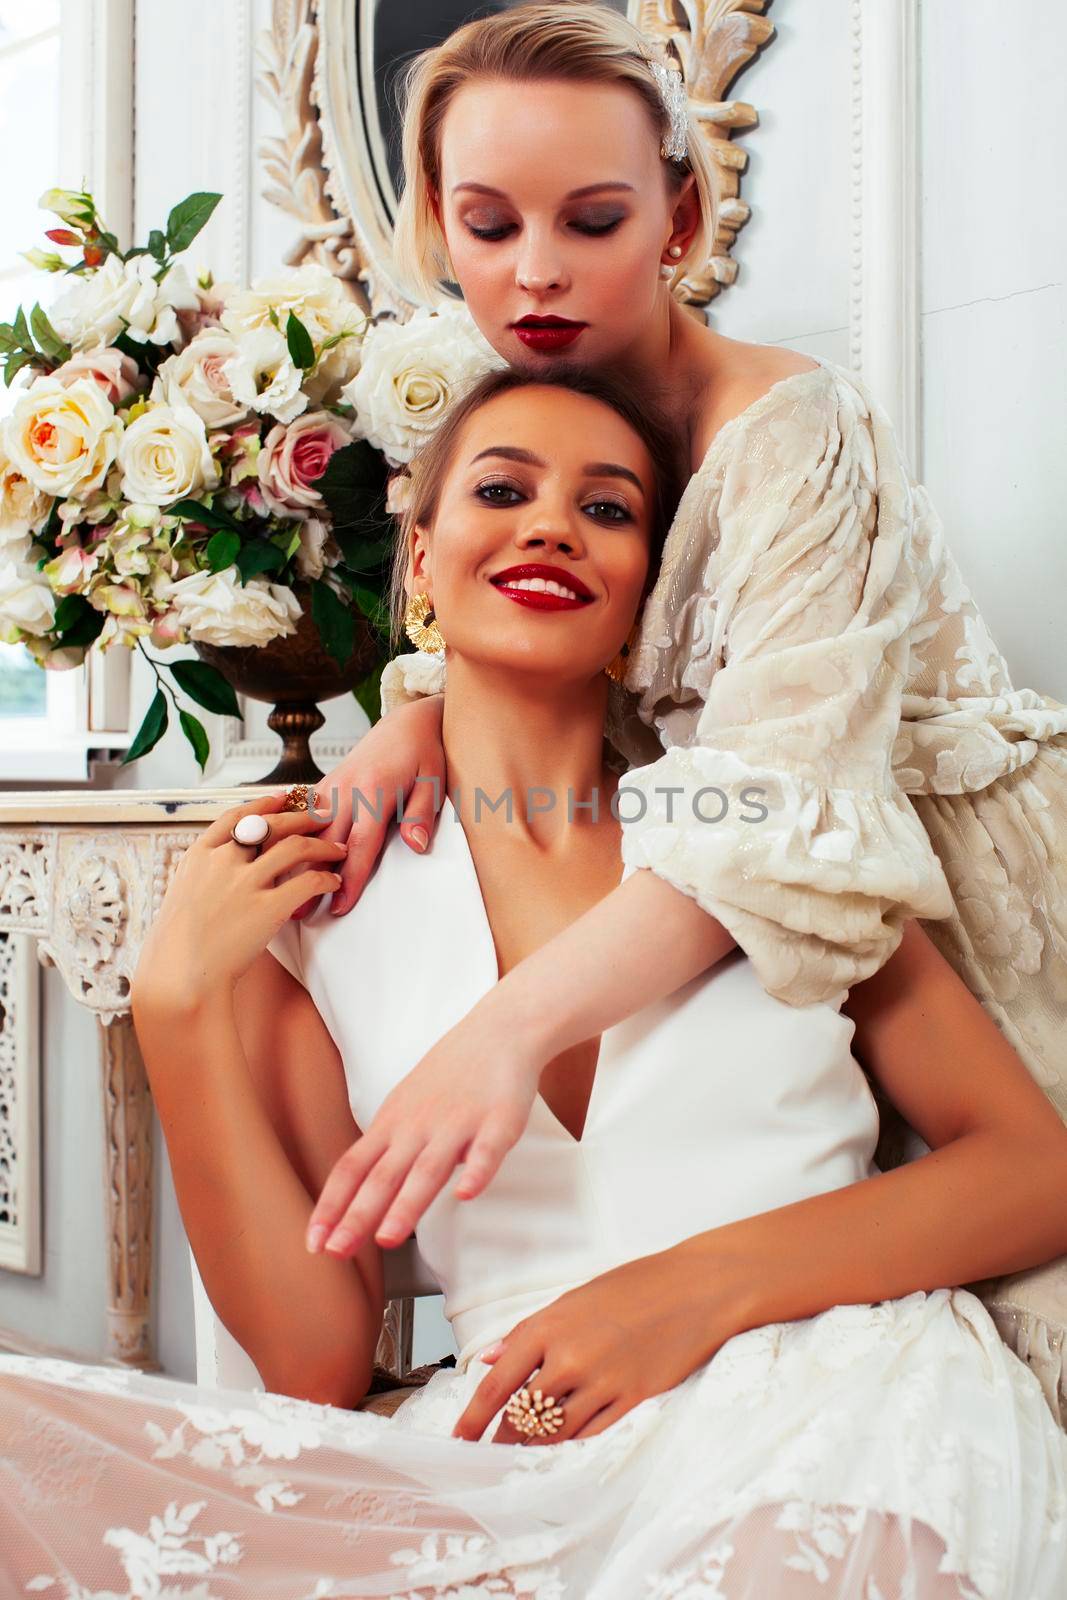 two young pretty lady in white lace fashion style dress posing in rich interior of royal hotel room, luxury lifestyle people concept, bride on wedding day closeup